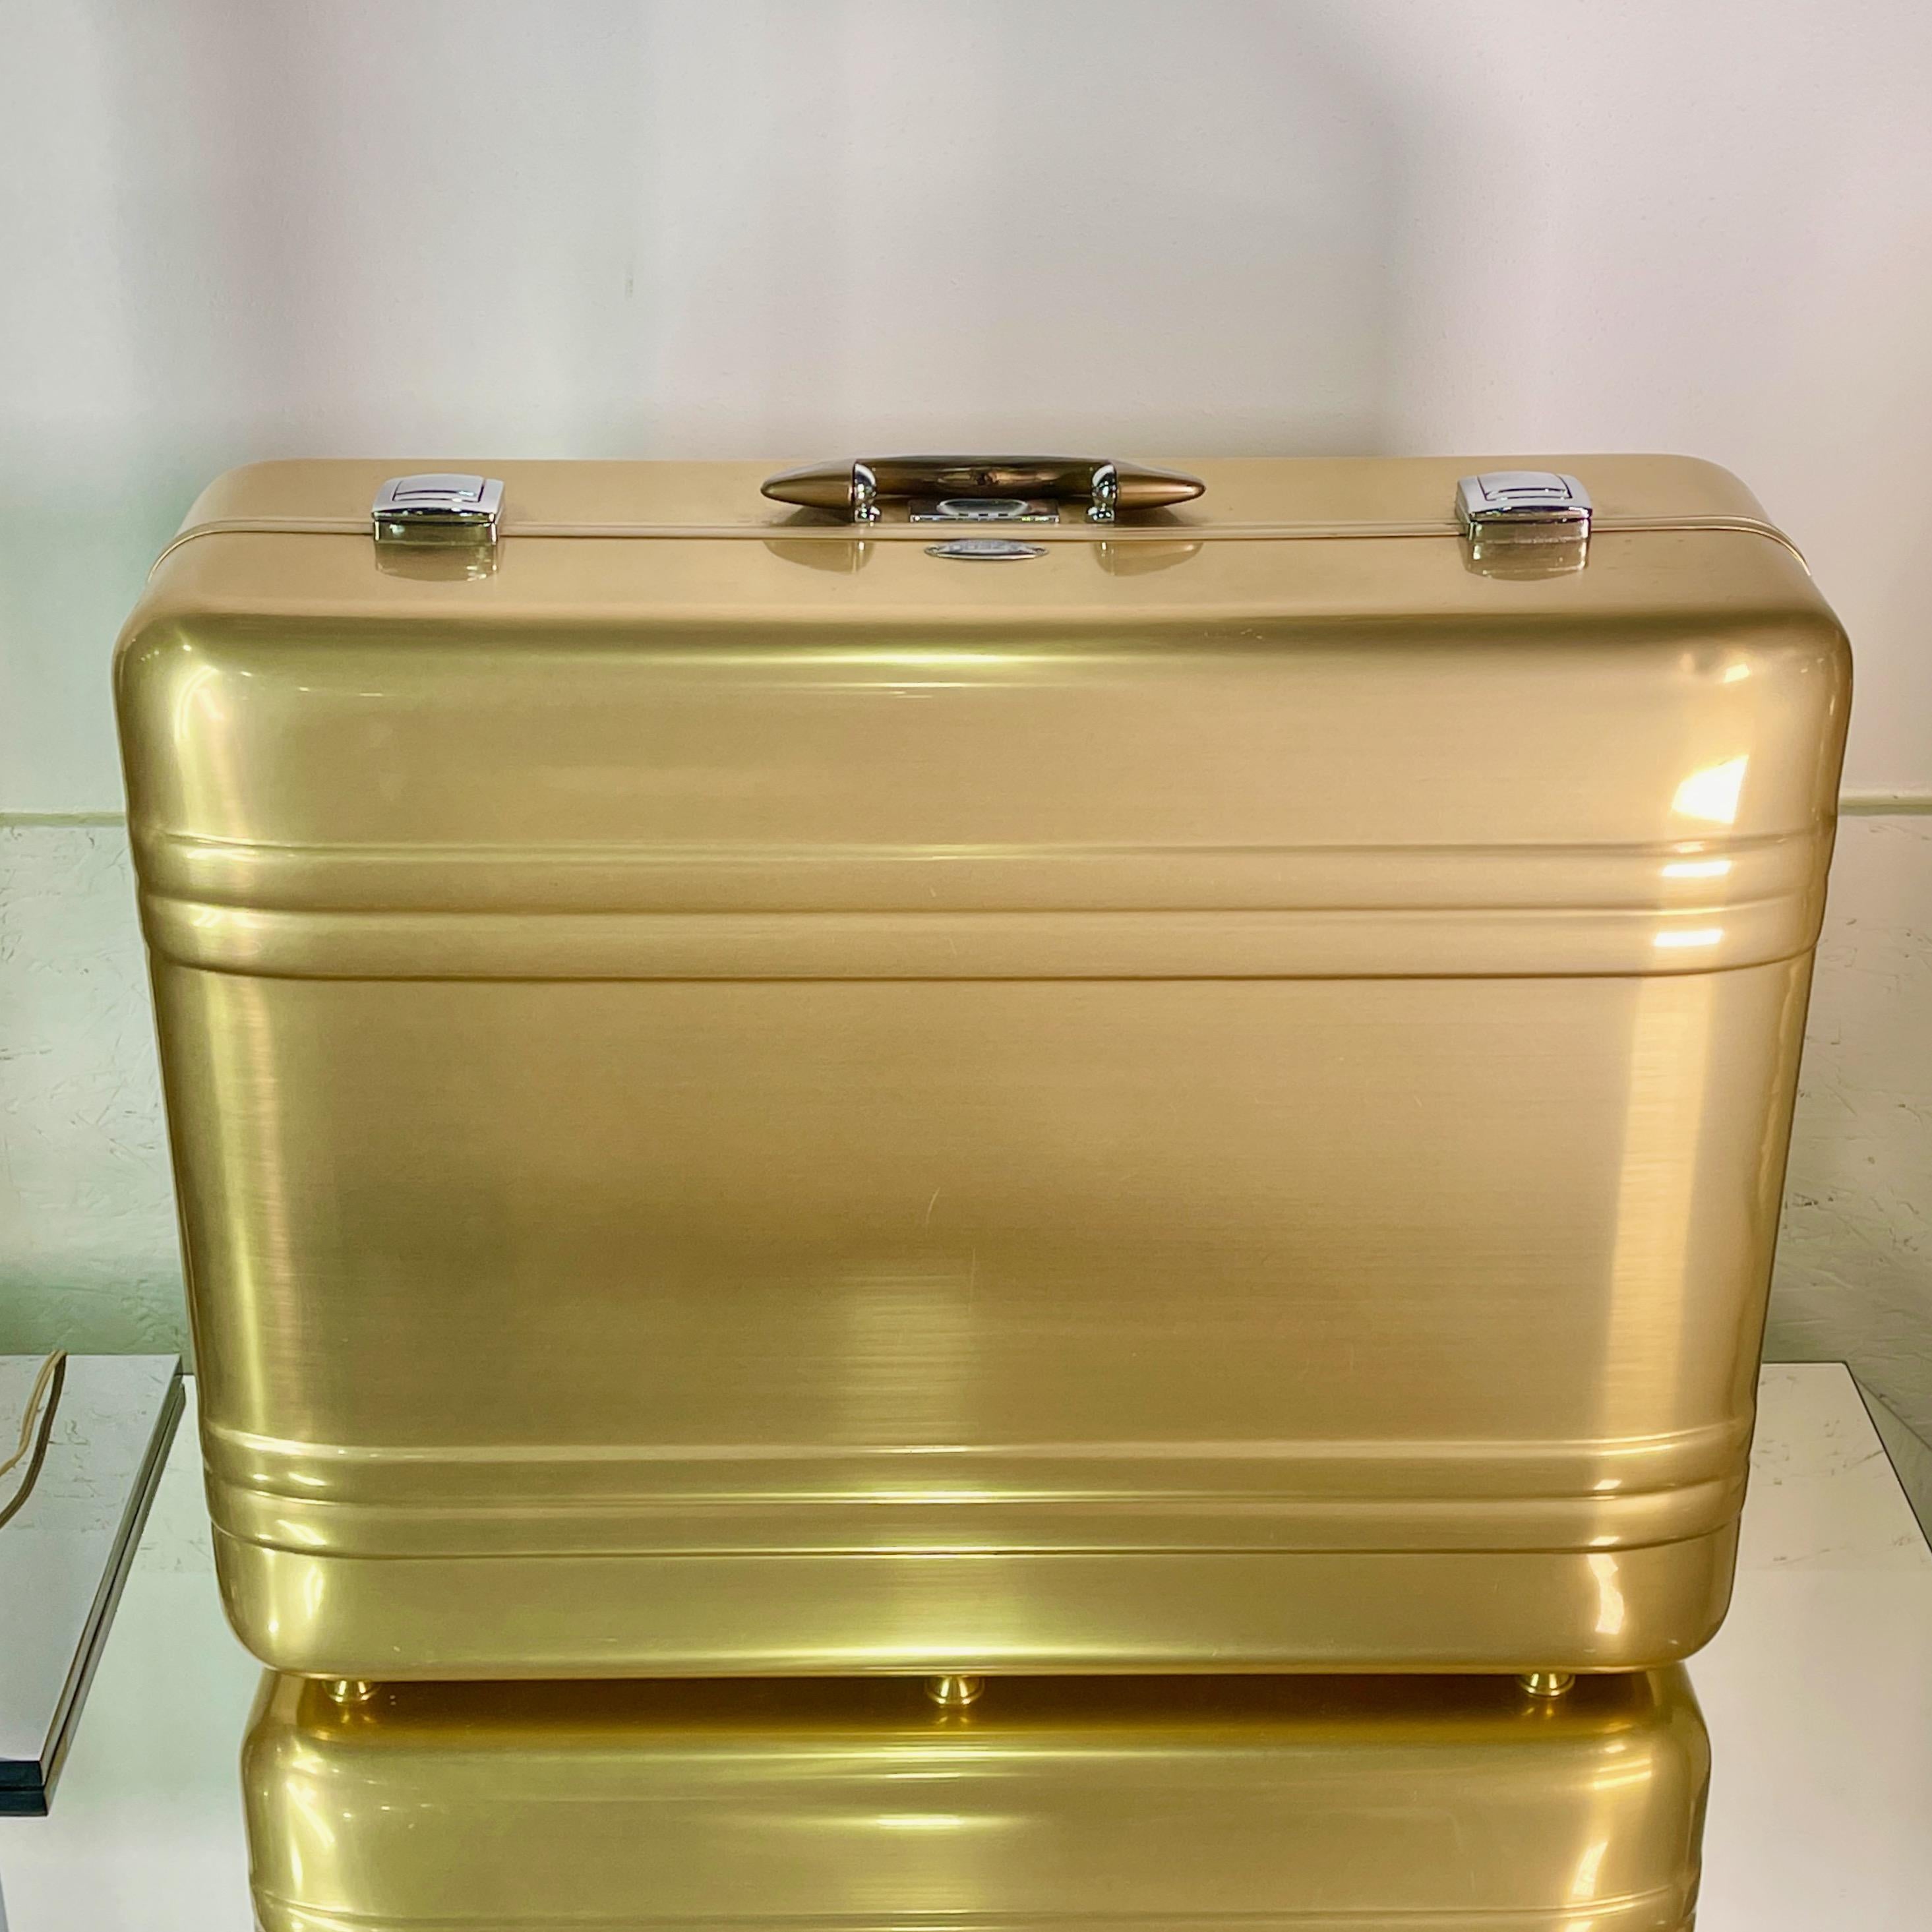 Vintage 1970’s suitcase made by Zero Halliburton in their special limited edition gold anodized aluminum.
Based on the original 1938 aluminum luggage design for Erle P. Halliburton which was further developed in 1946 into the double ribbed design